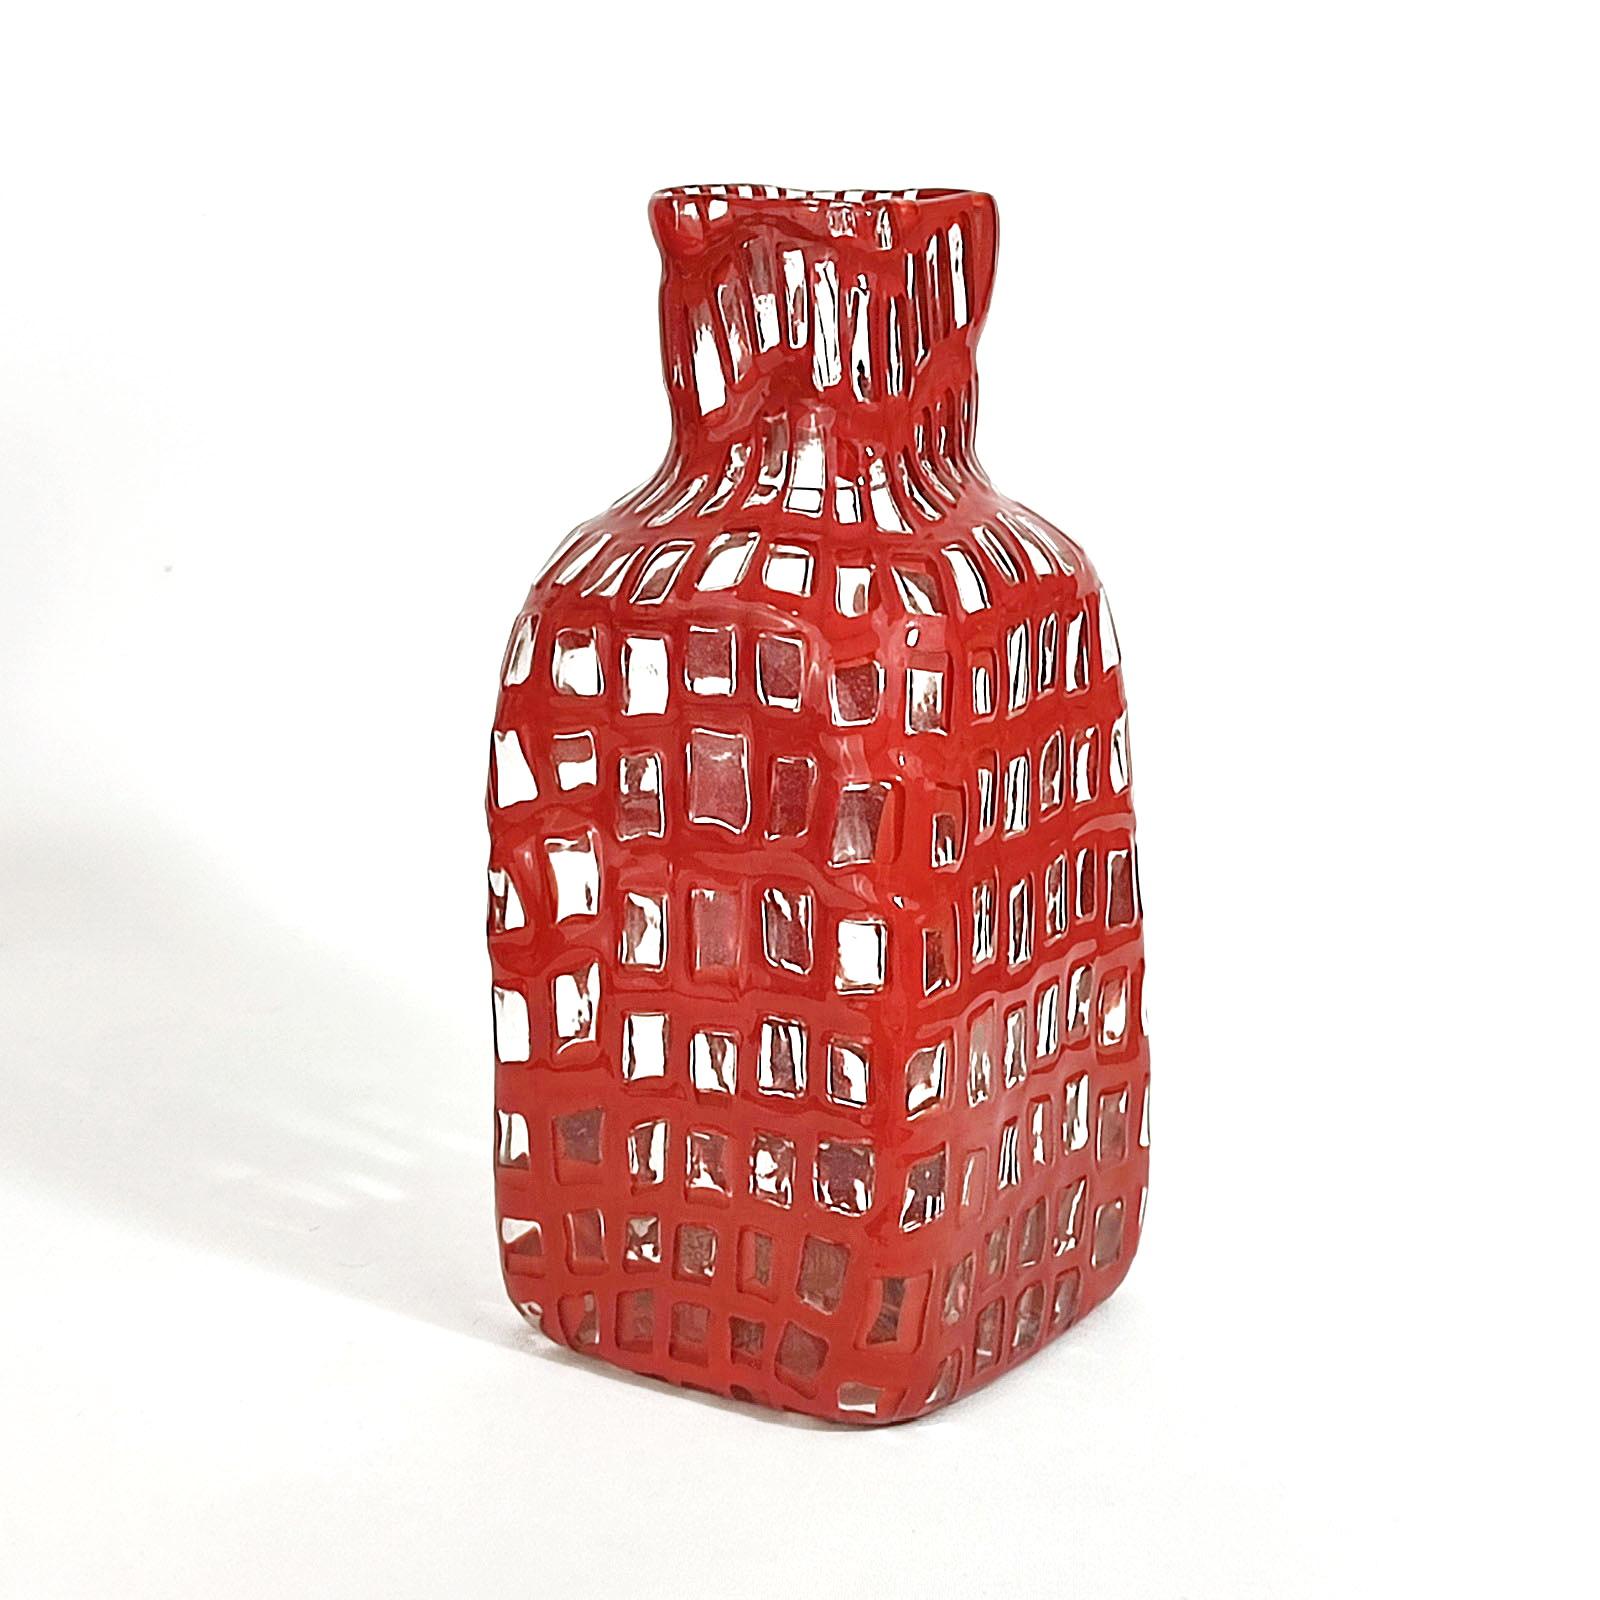 Tobia Scarpa ‘Occhi’ bottle, Venini, Italy, 1960s.
Colorless glass, red bordered murinne, arranged like a chessboard and merged. Quadrangular shape, rounded at the corners, square neck. In excellent condition.
Marked: Venini, Murano, Italy (round